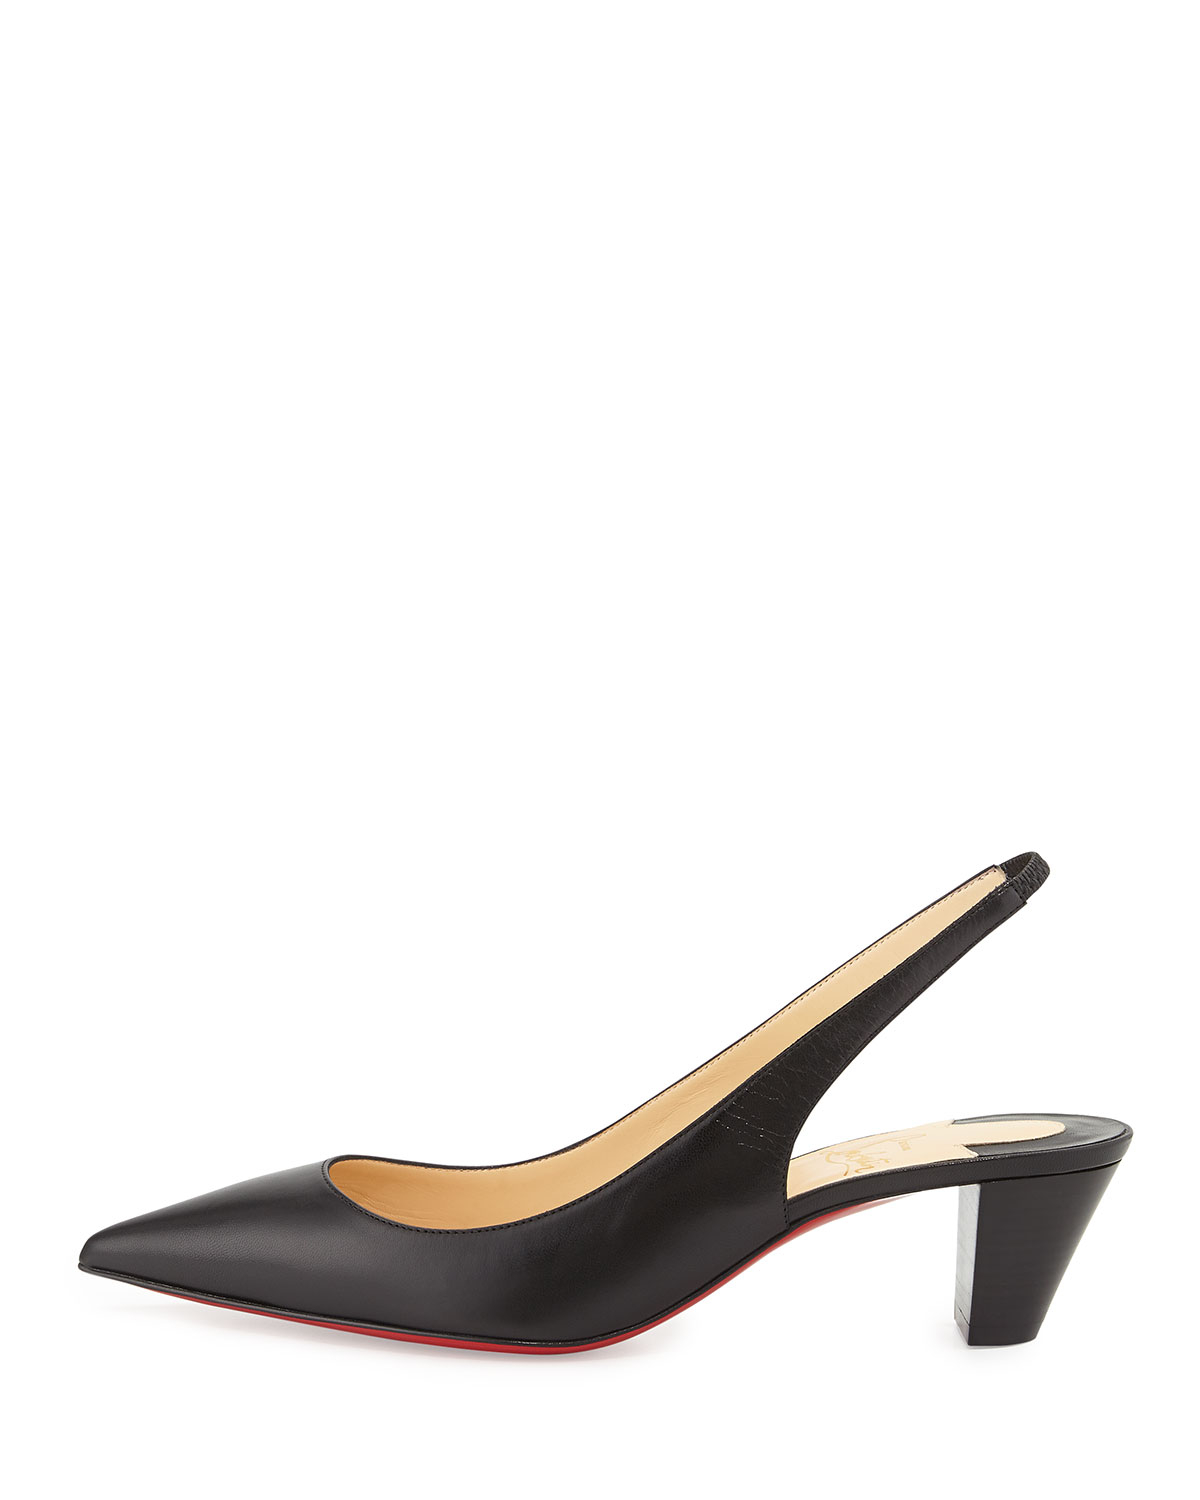 Lyst - Christian Louboutin Karelli Point-Toe Low-Heel Red Sole ...